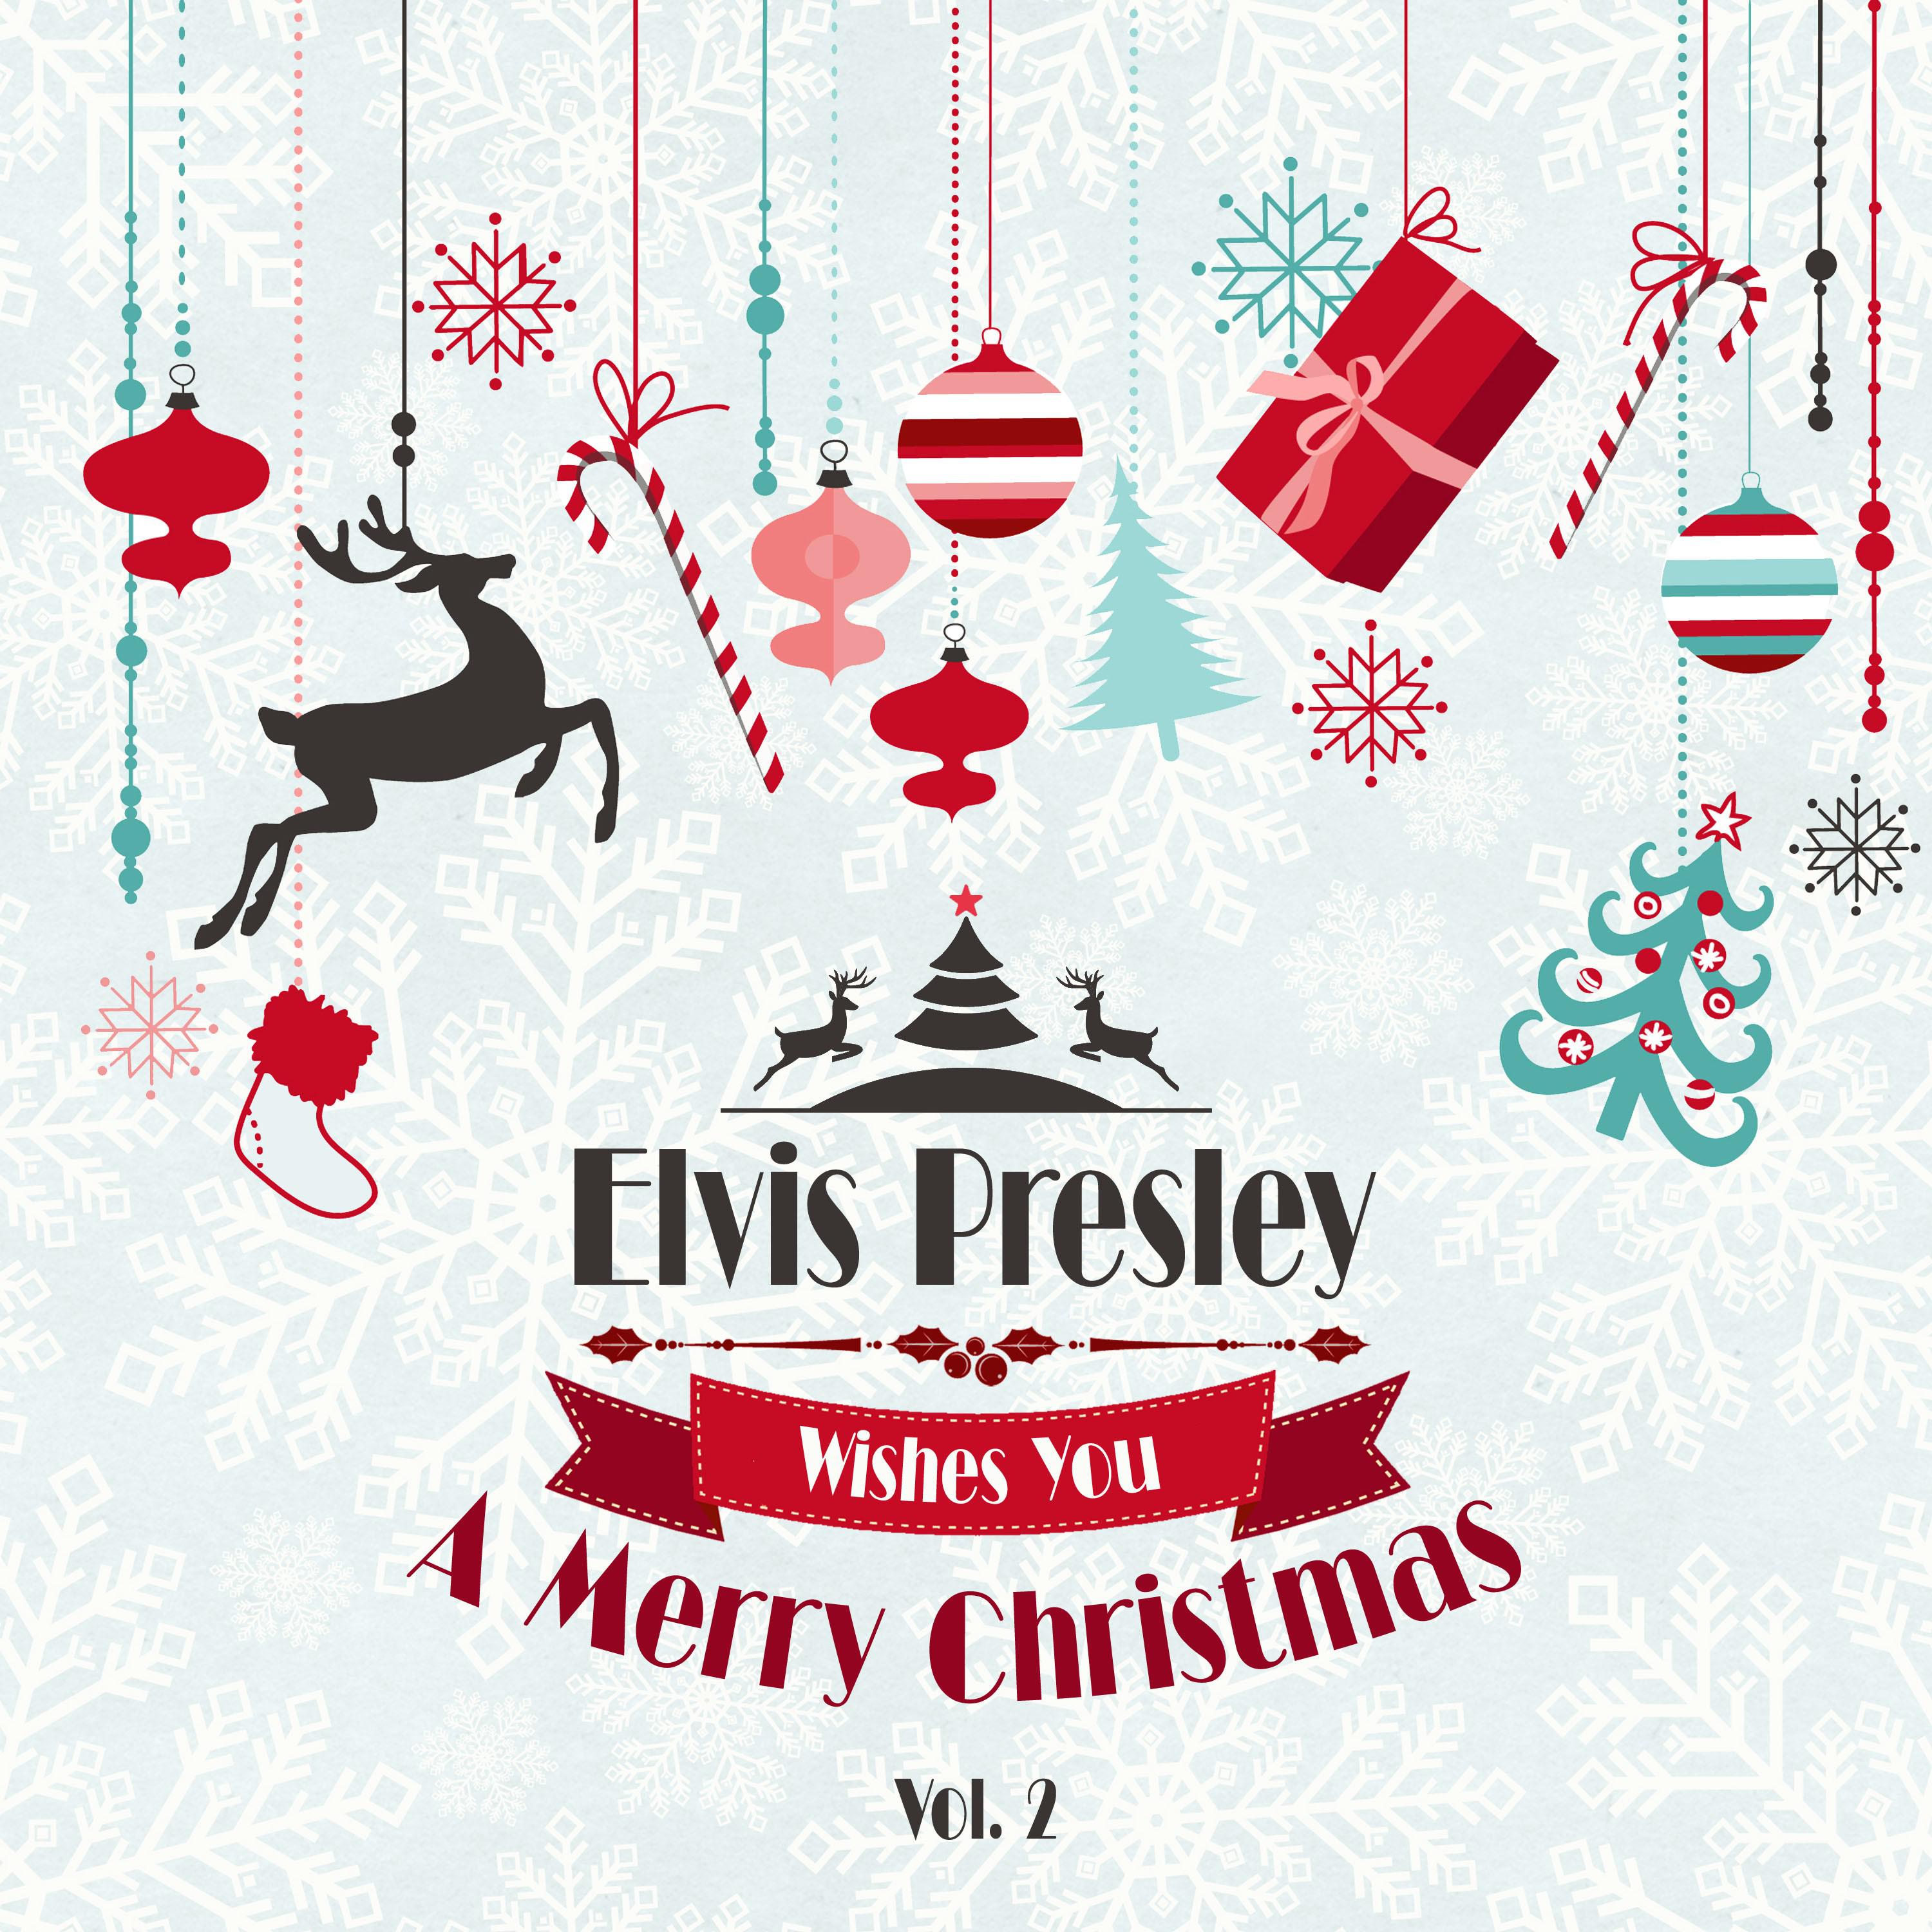 Elvis Presley Wishes You a Merry Christmas, Vol. 2专辑